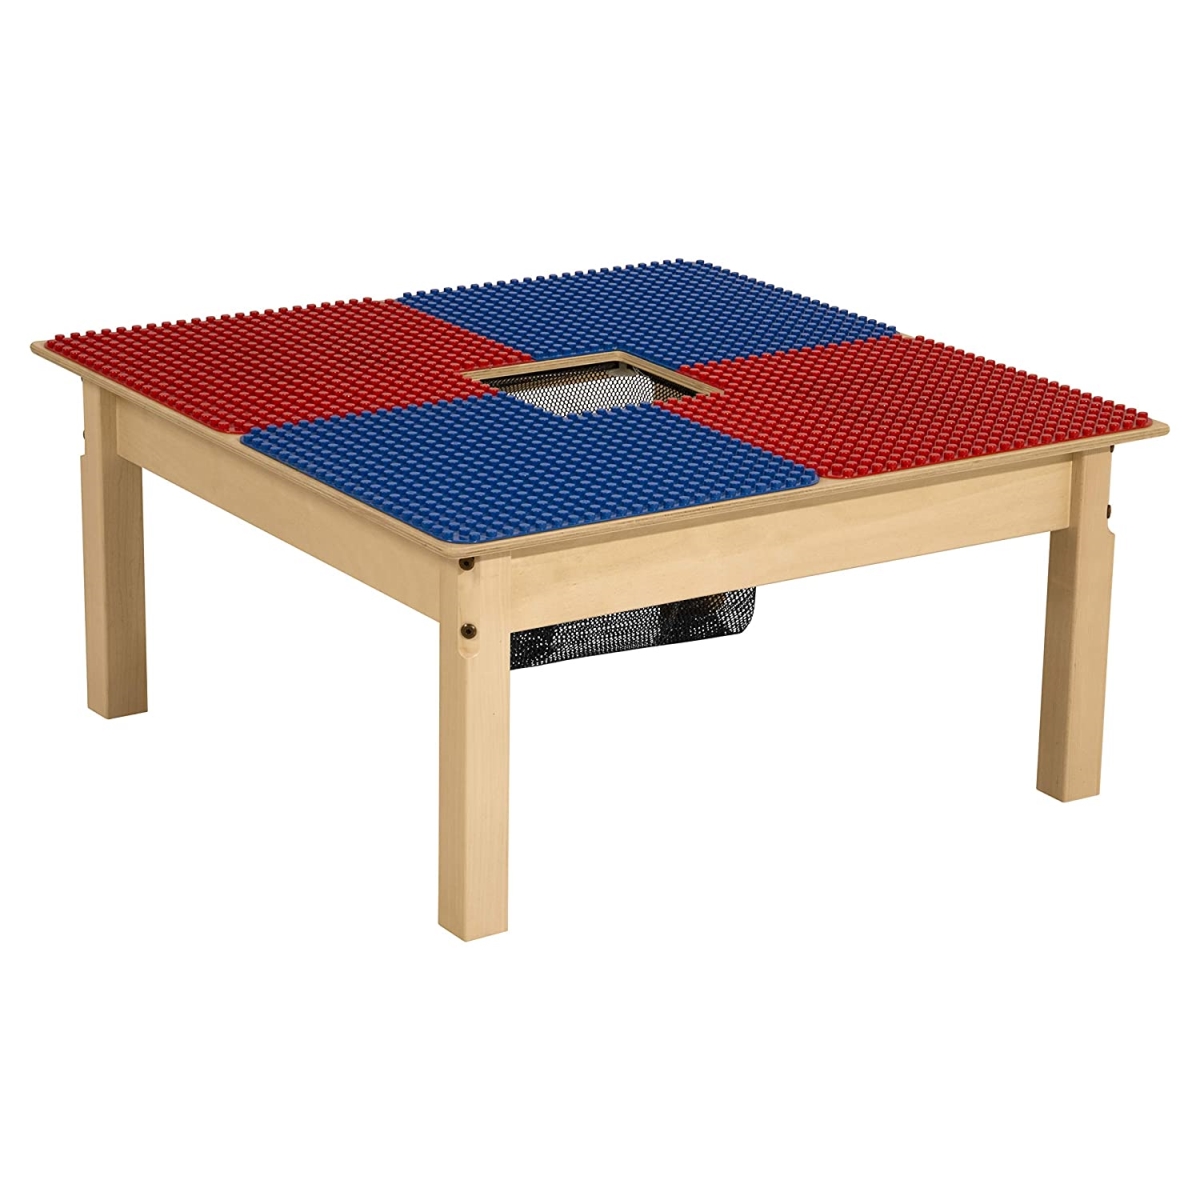 Tp3131pgna1217-br 12-17 In. Duplo Compatible Table With Adjustable Legs, Blue & Red - Square